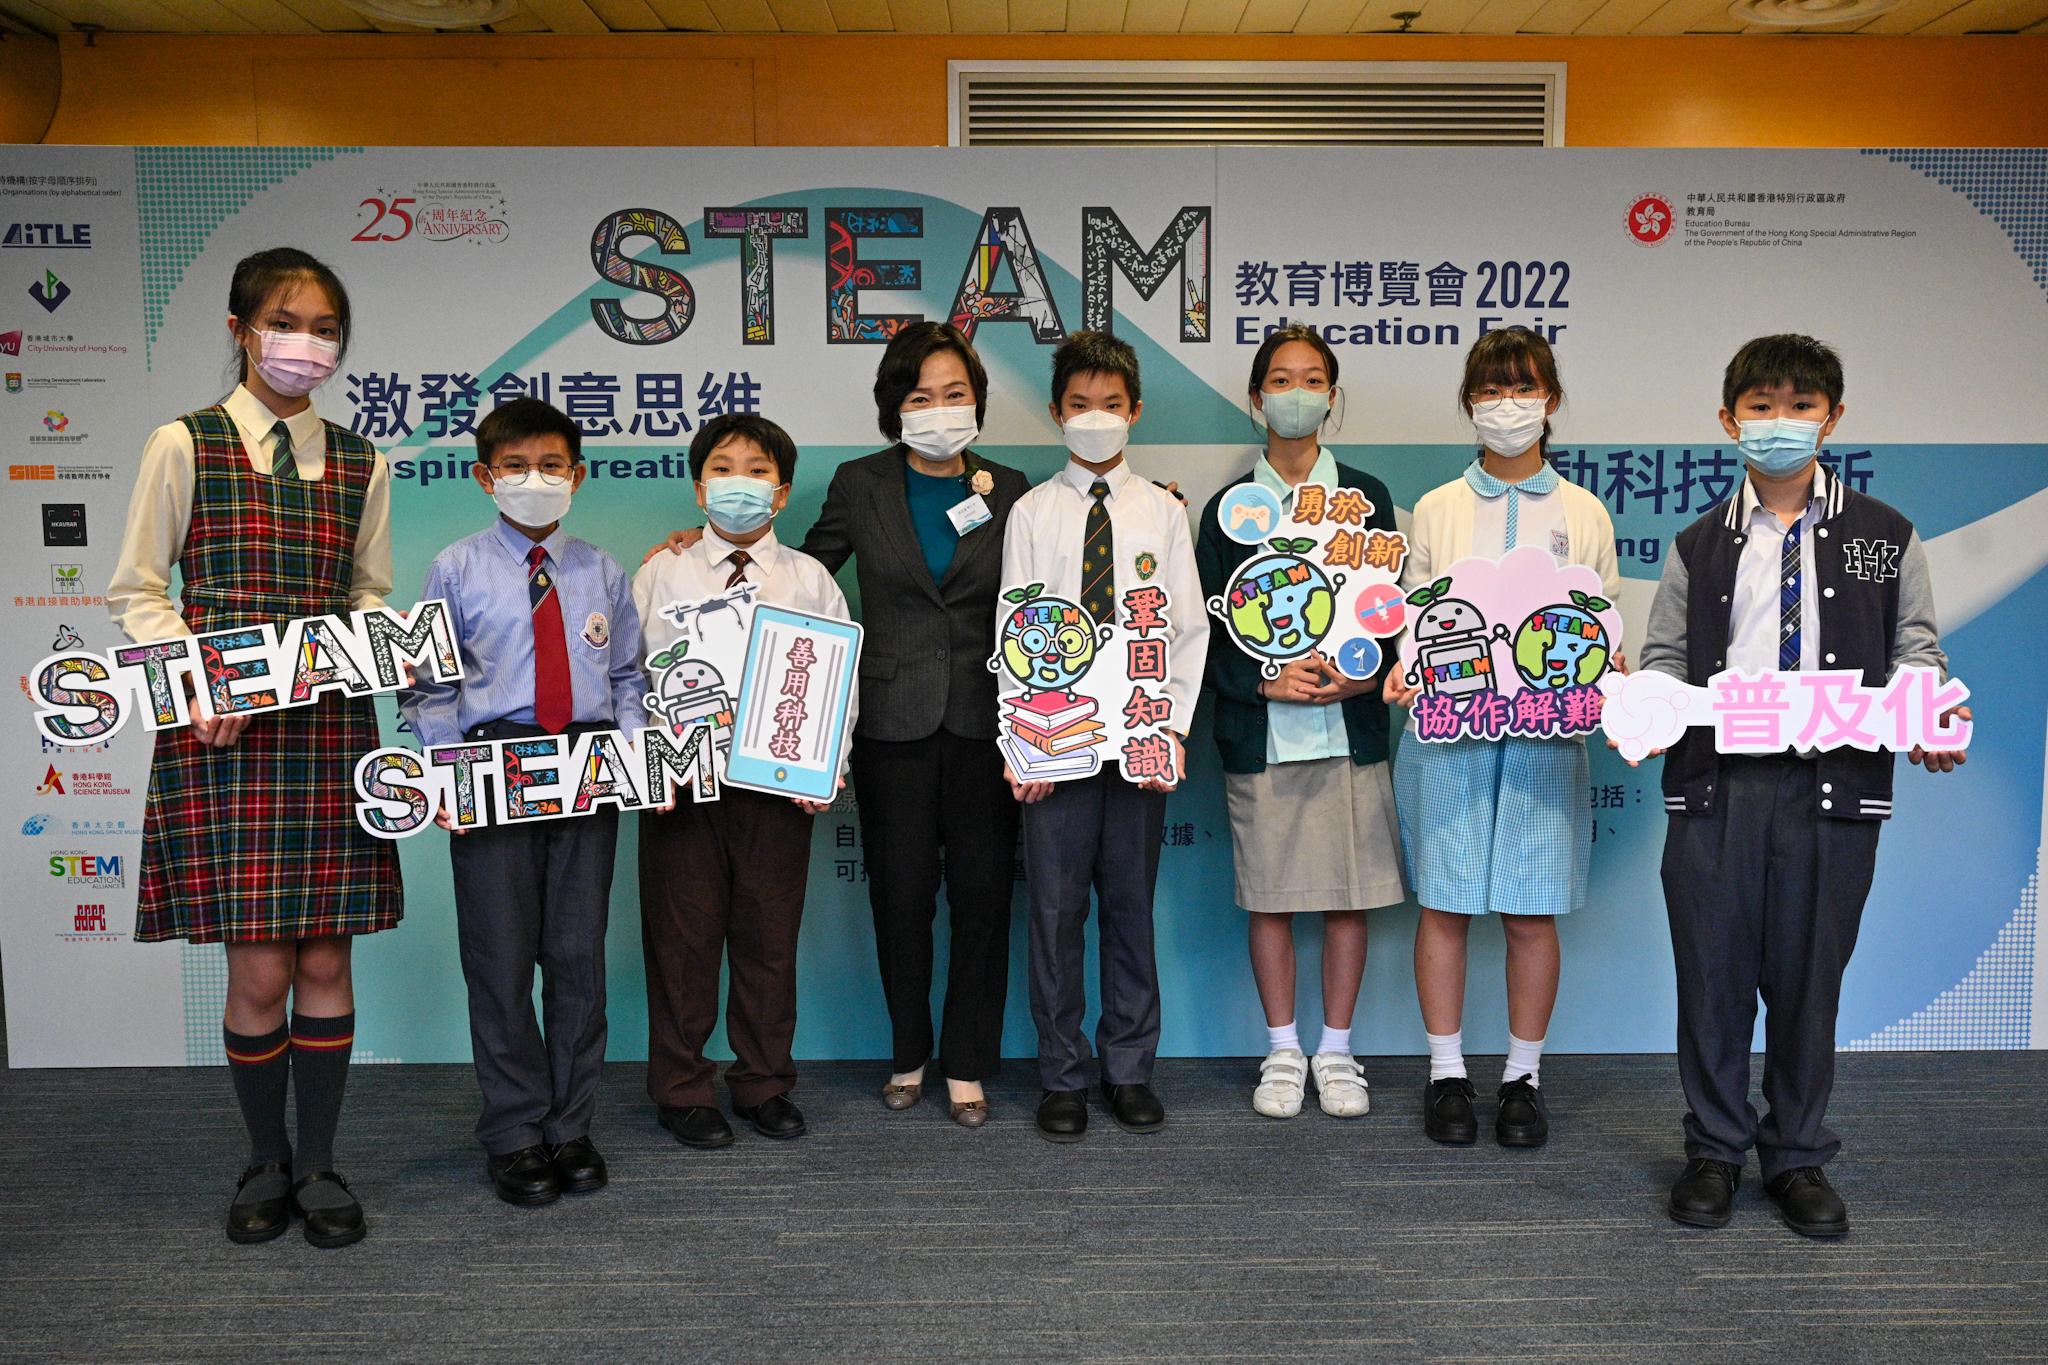 The Secretary for Education, Dr Choi Yuk-lin (fourth left), is pictured with students of participating schools before the opening ceremony of the STEAM Education Fair 2022 today (November 26).